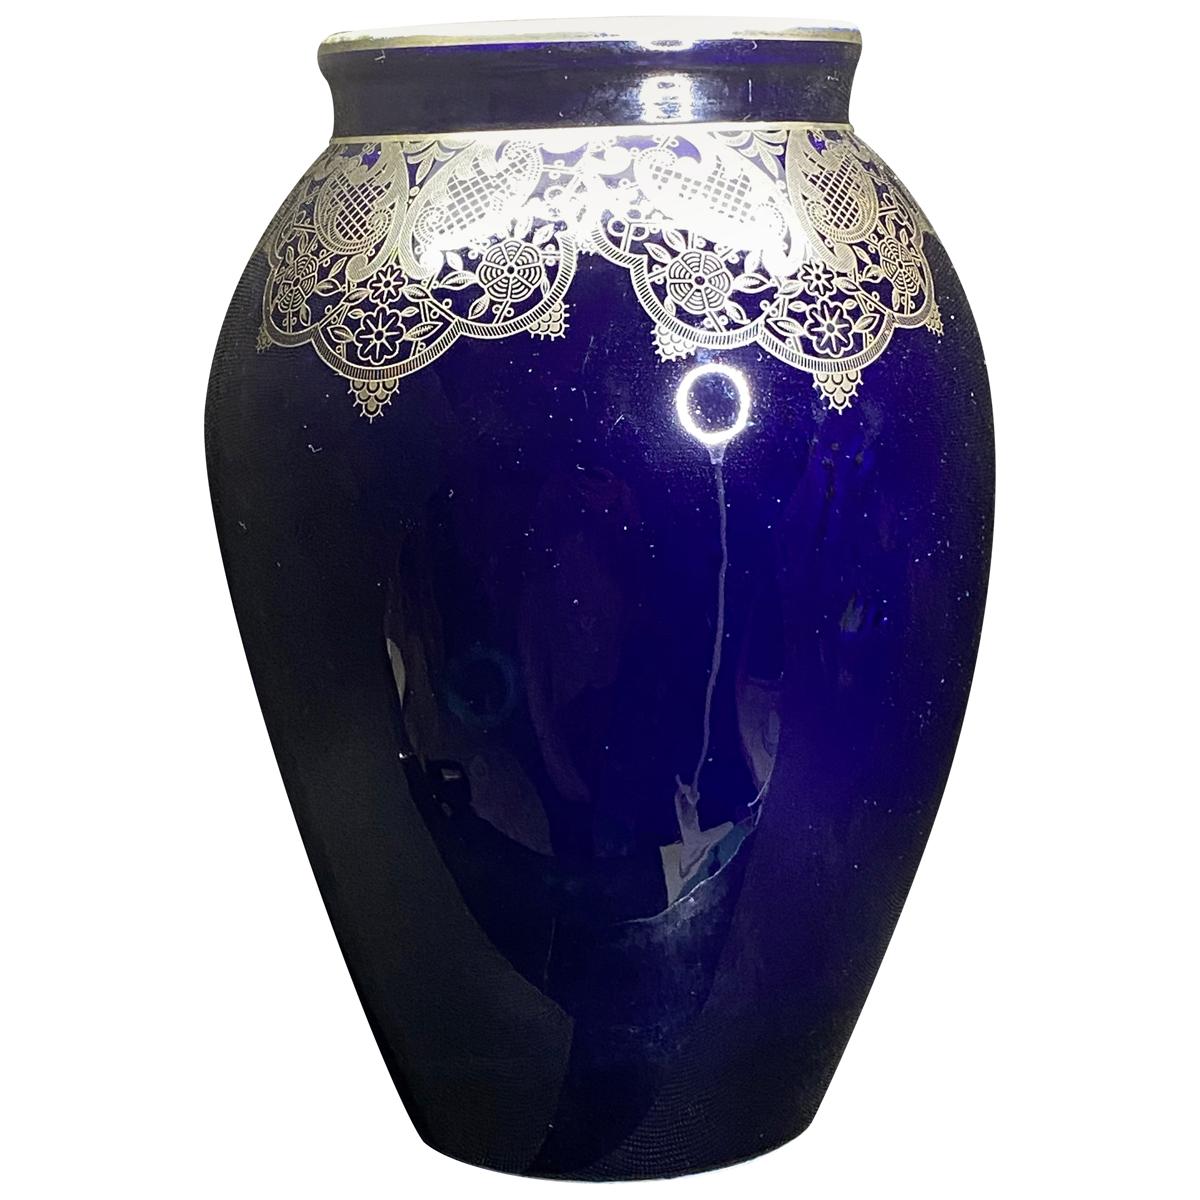 Dark Blue Colored Silver Overlay Vase by Hutschenreuther Hohenberg German, 1930s For Sale